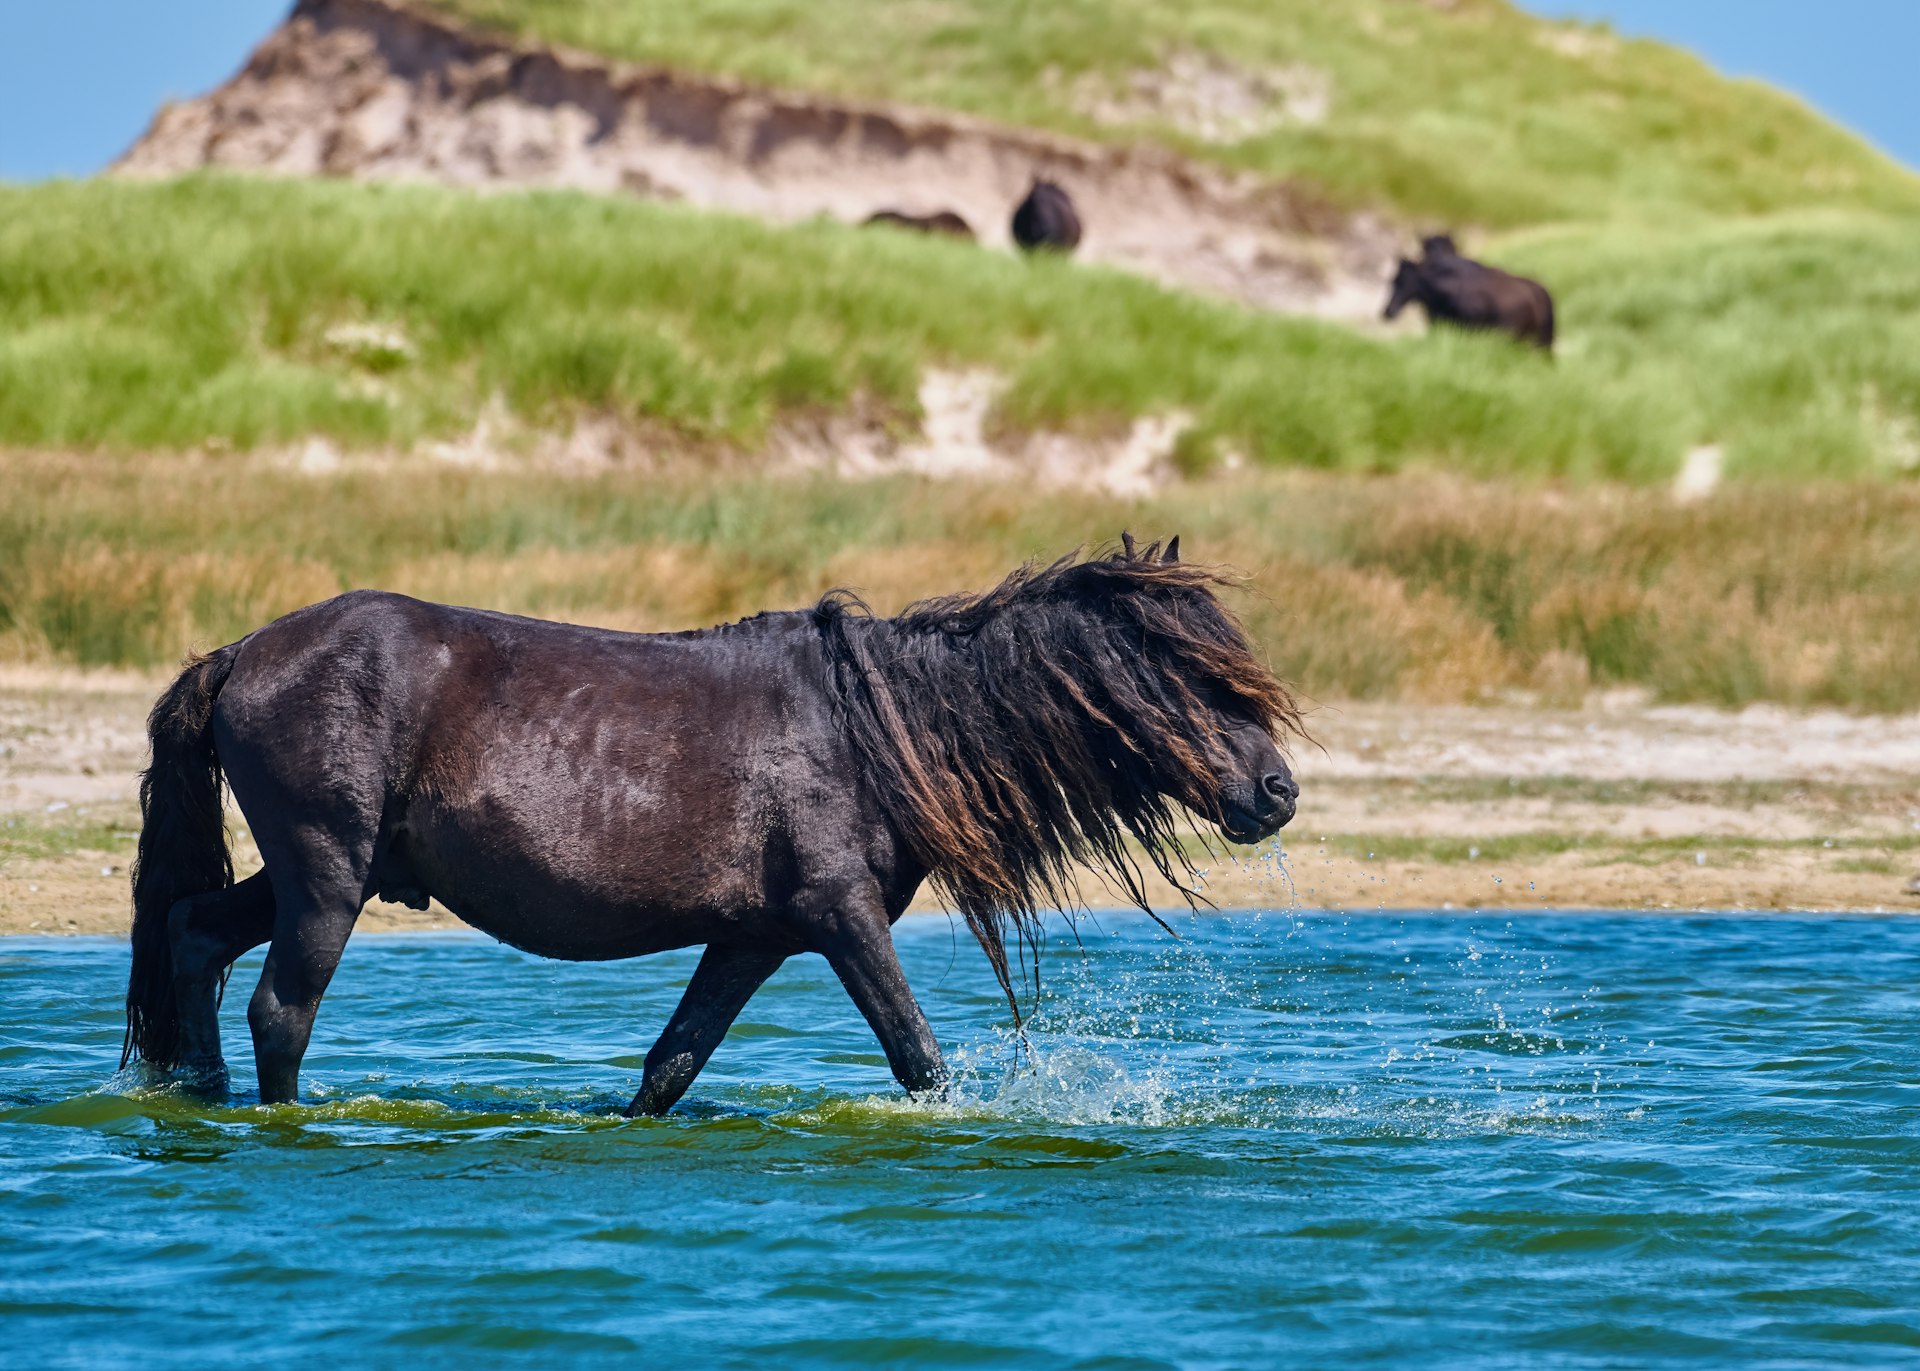 A dark brown pony wades through water by the shore of an island. Several other ponies are in the background on grassy mounds